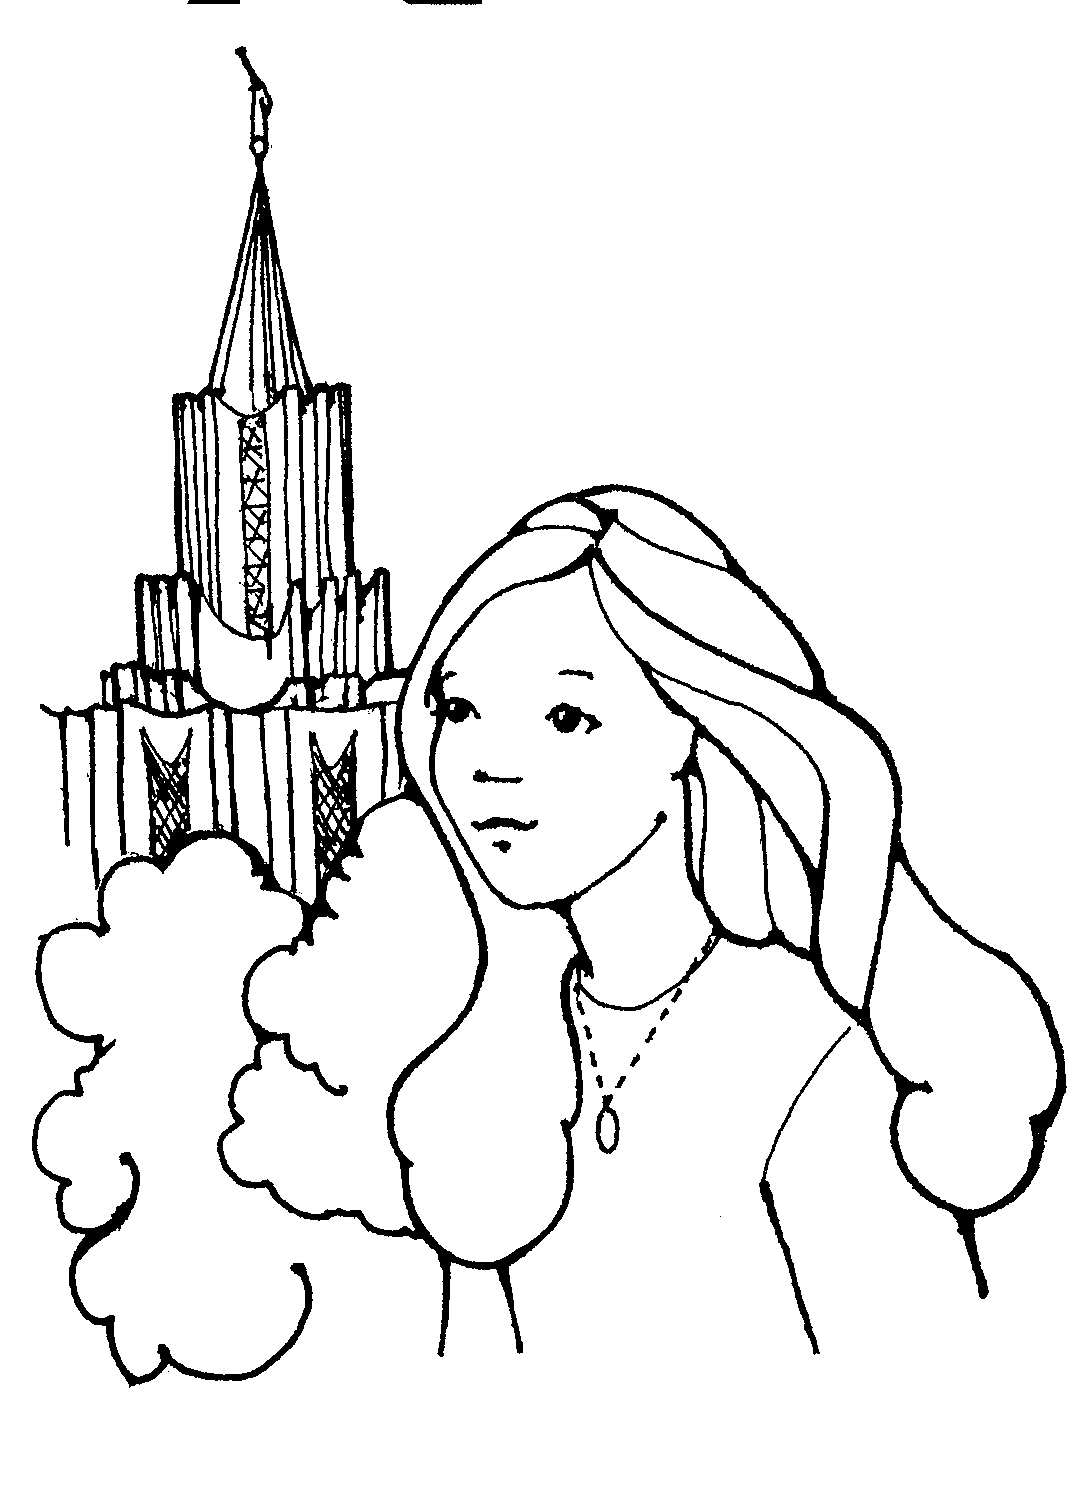 free lds clipart book of mormon - photo #34